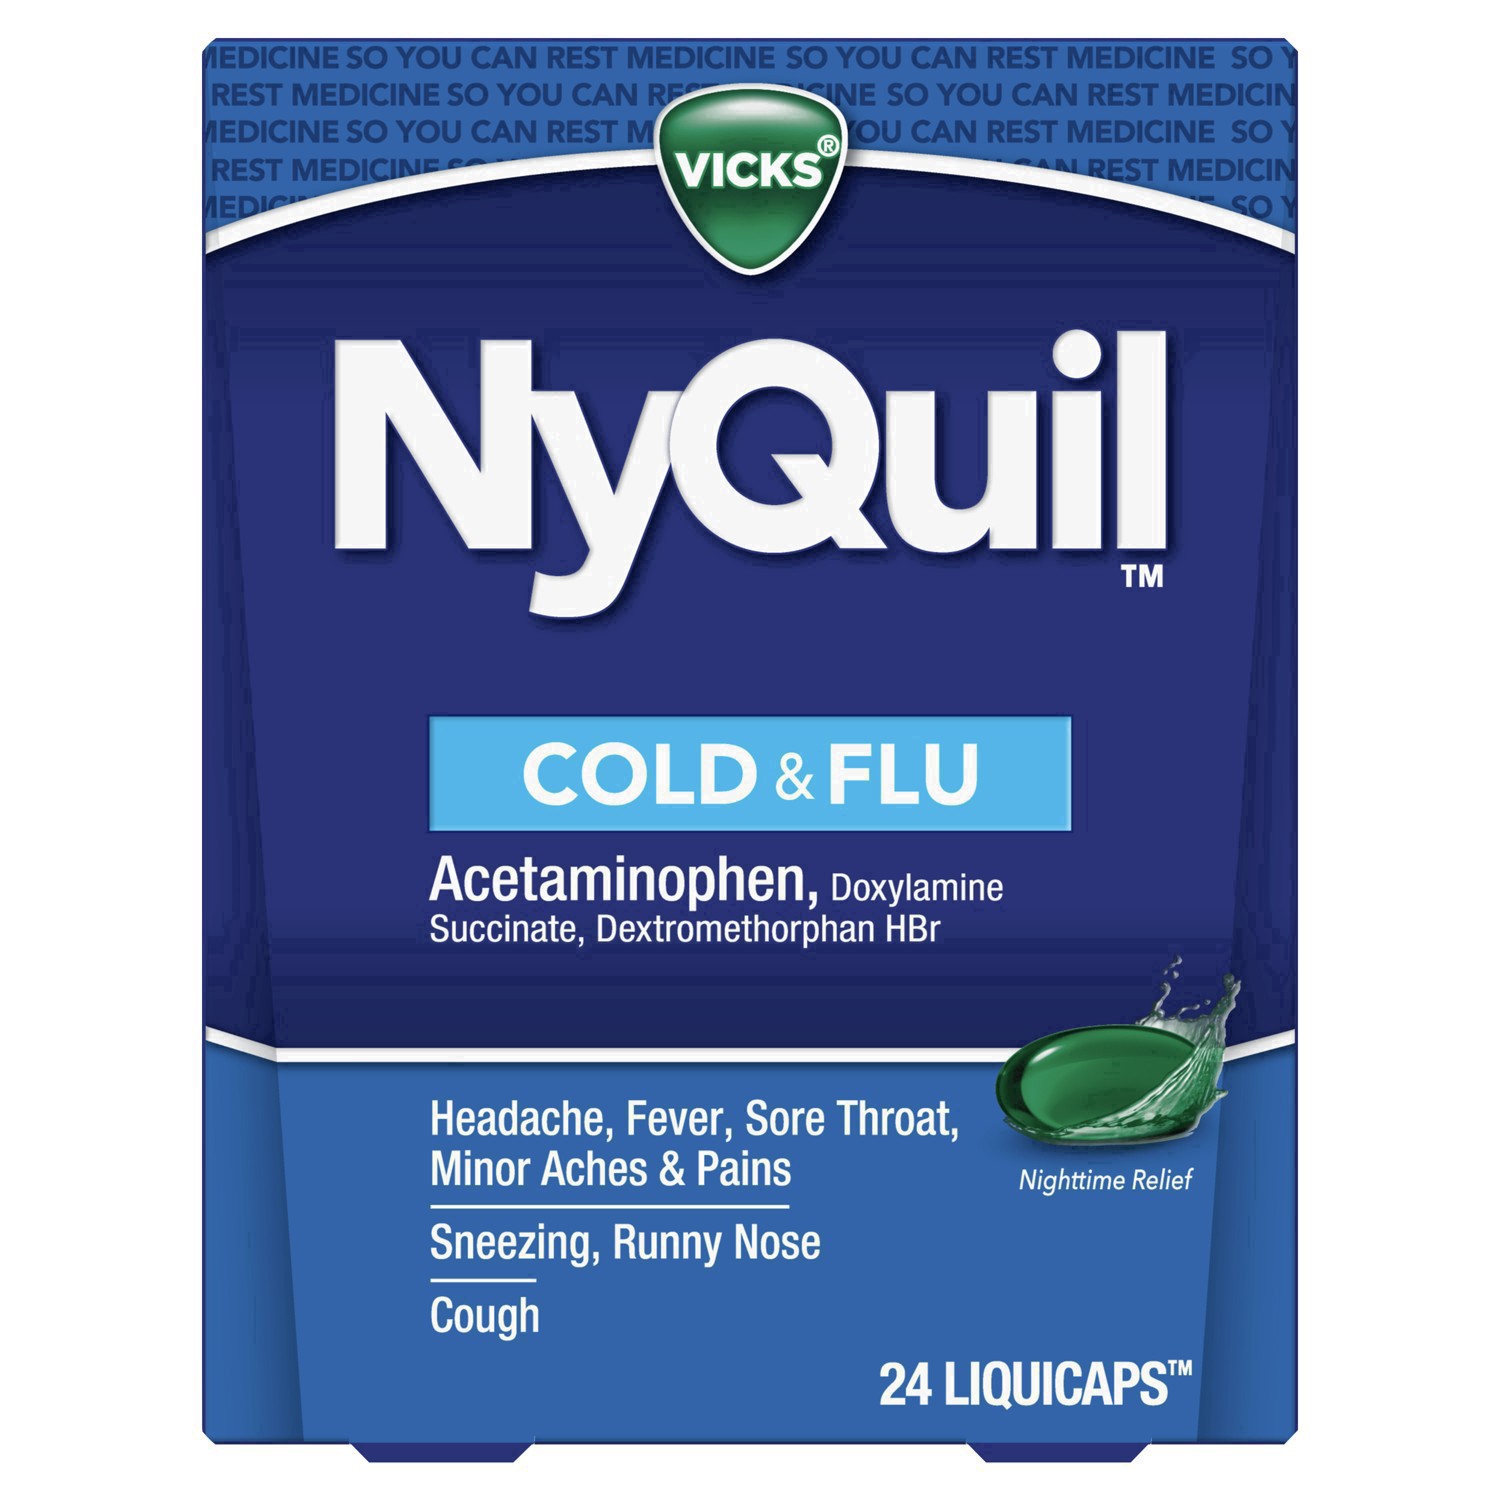 slide 36 of 68, NyQuil Vicks NyQuil Cold & Flu Medicine LiquiCaps - 24ct, 24 ct